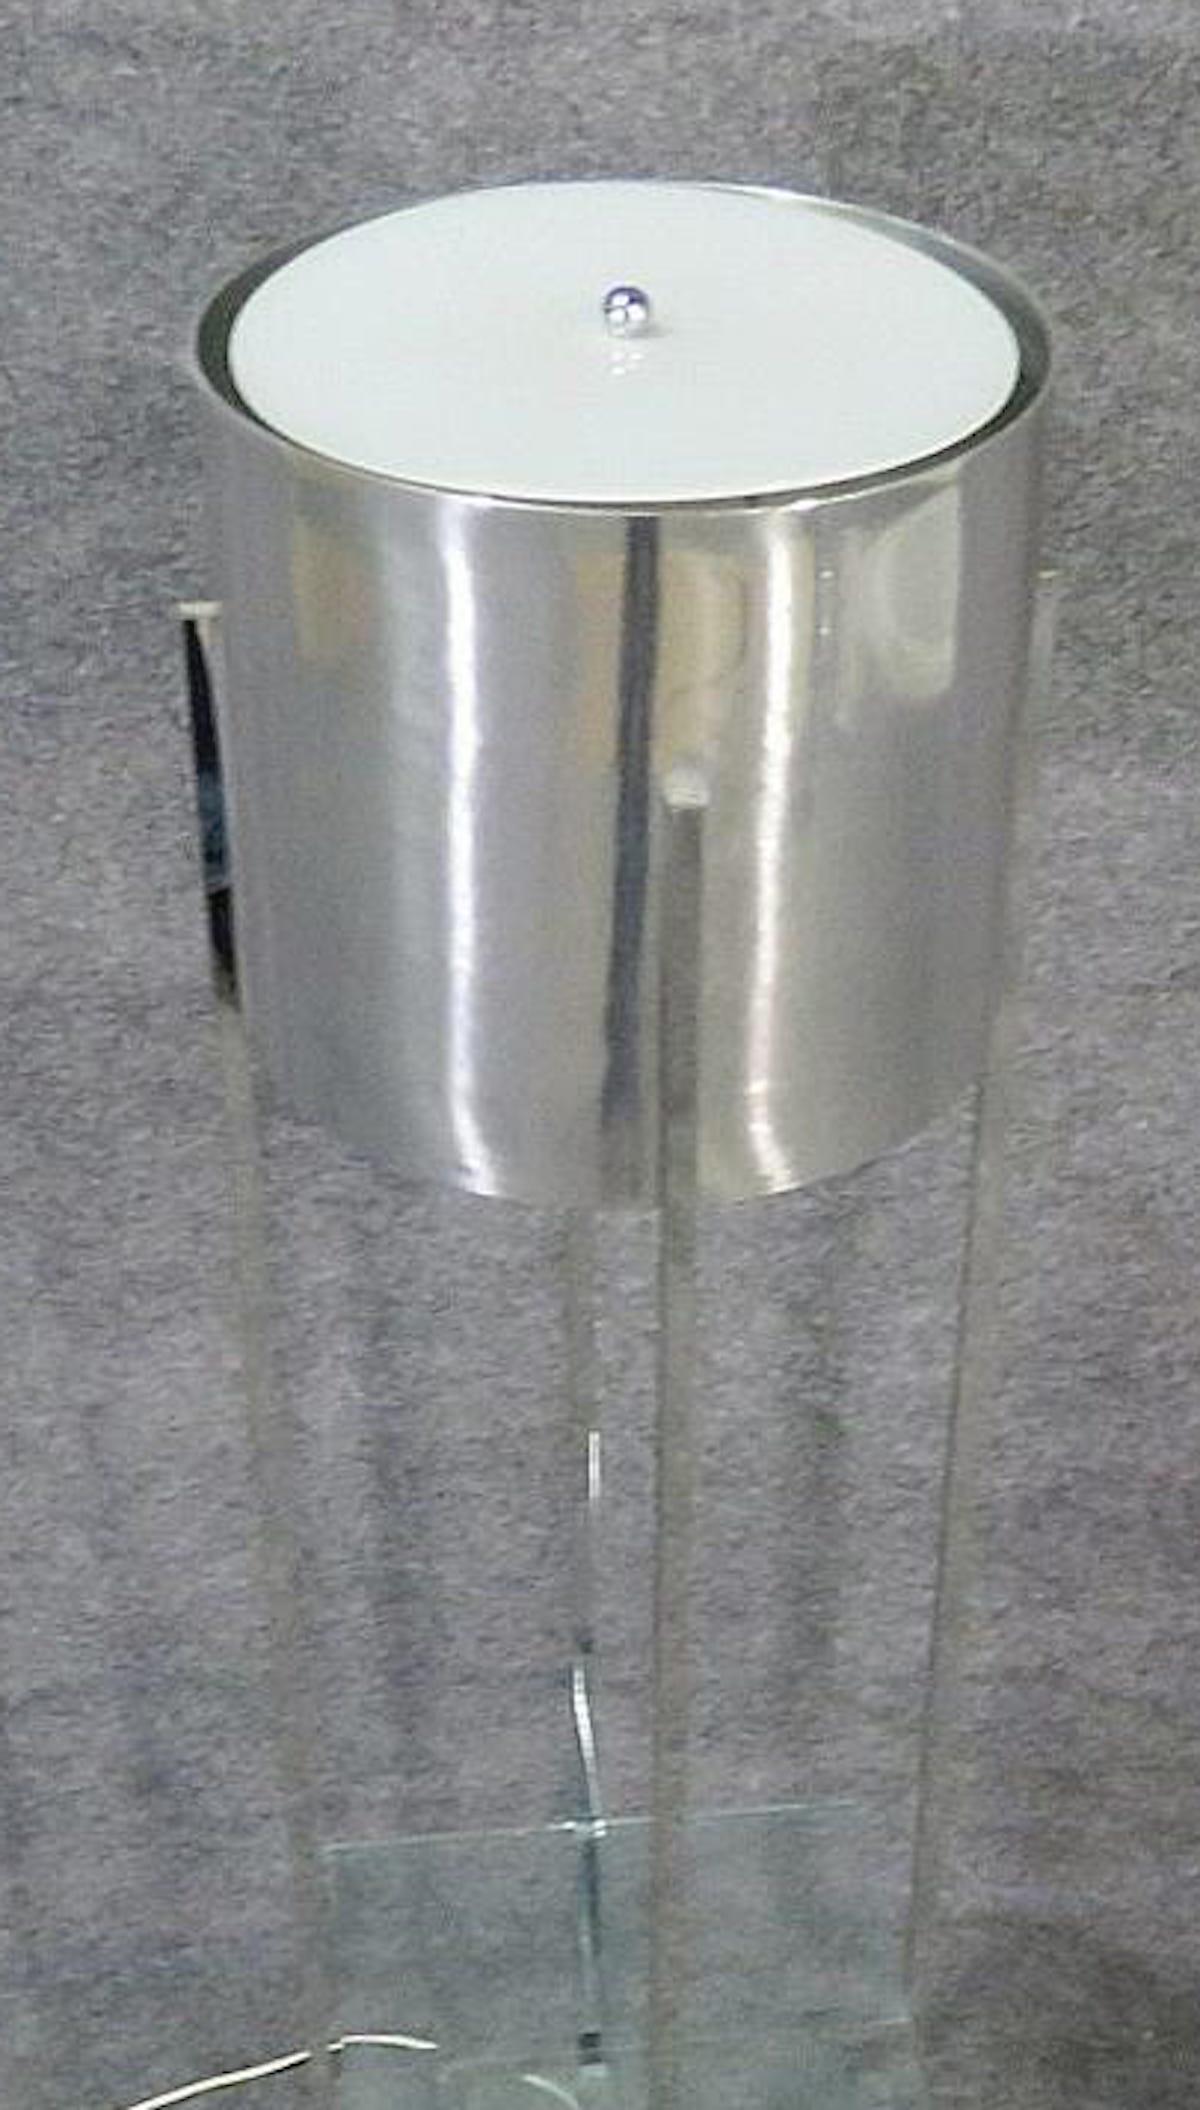 Tall chrome lamp with one glass shelf and silver shade.
(Please confirm item location - NY or NJ - with dealer).
 